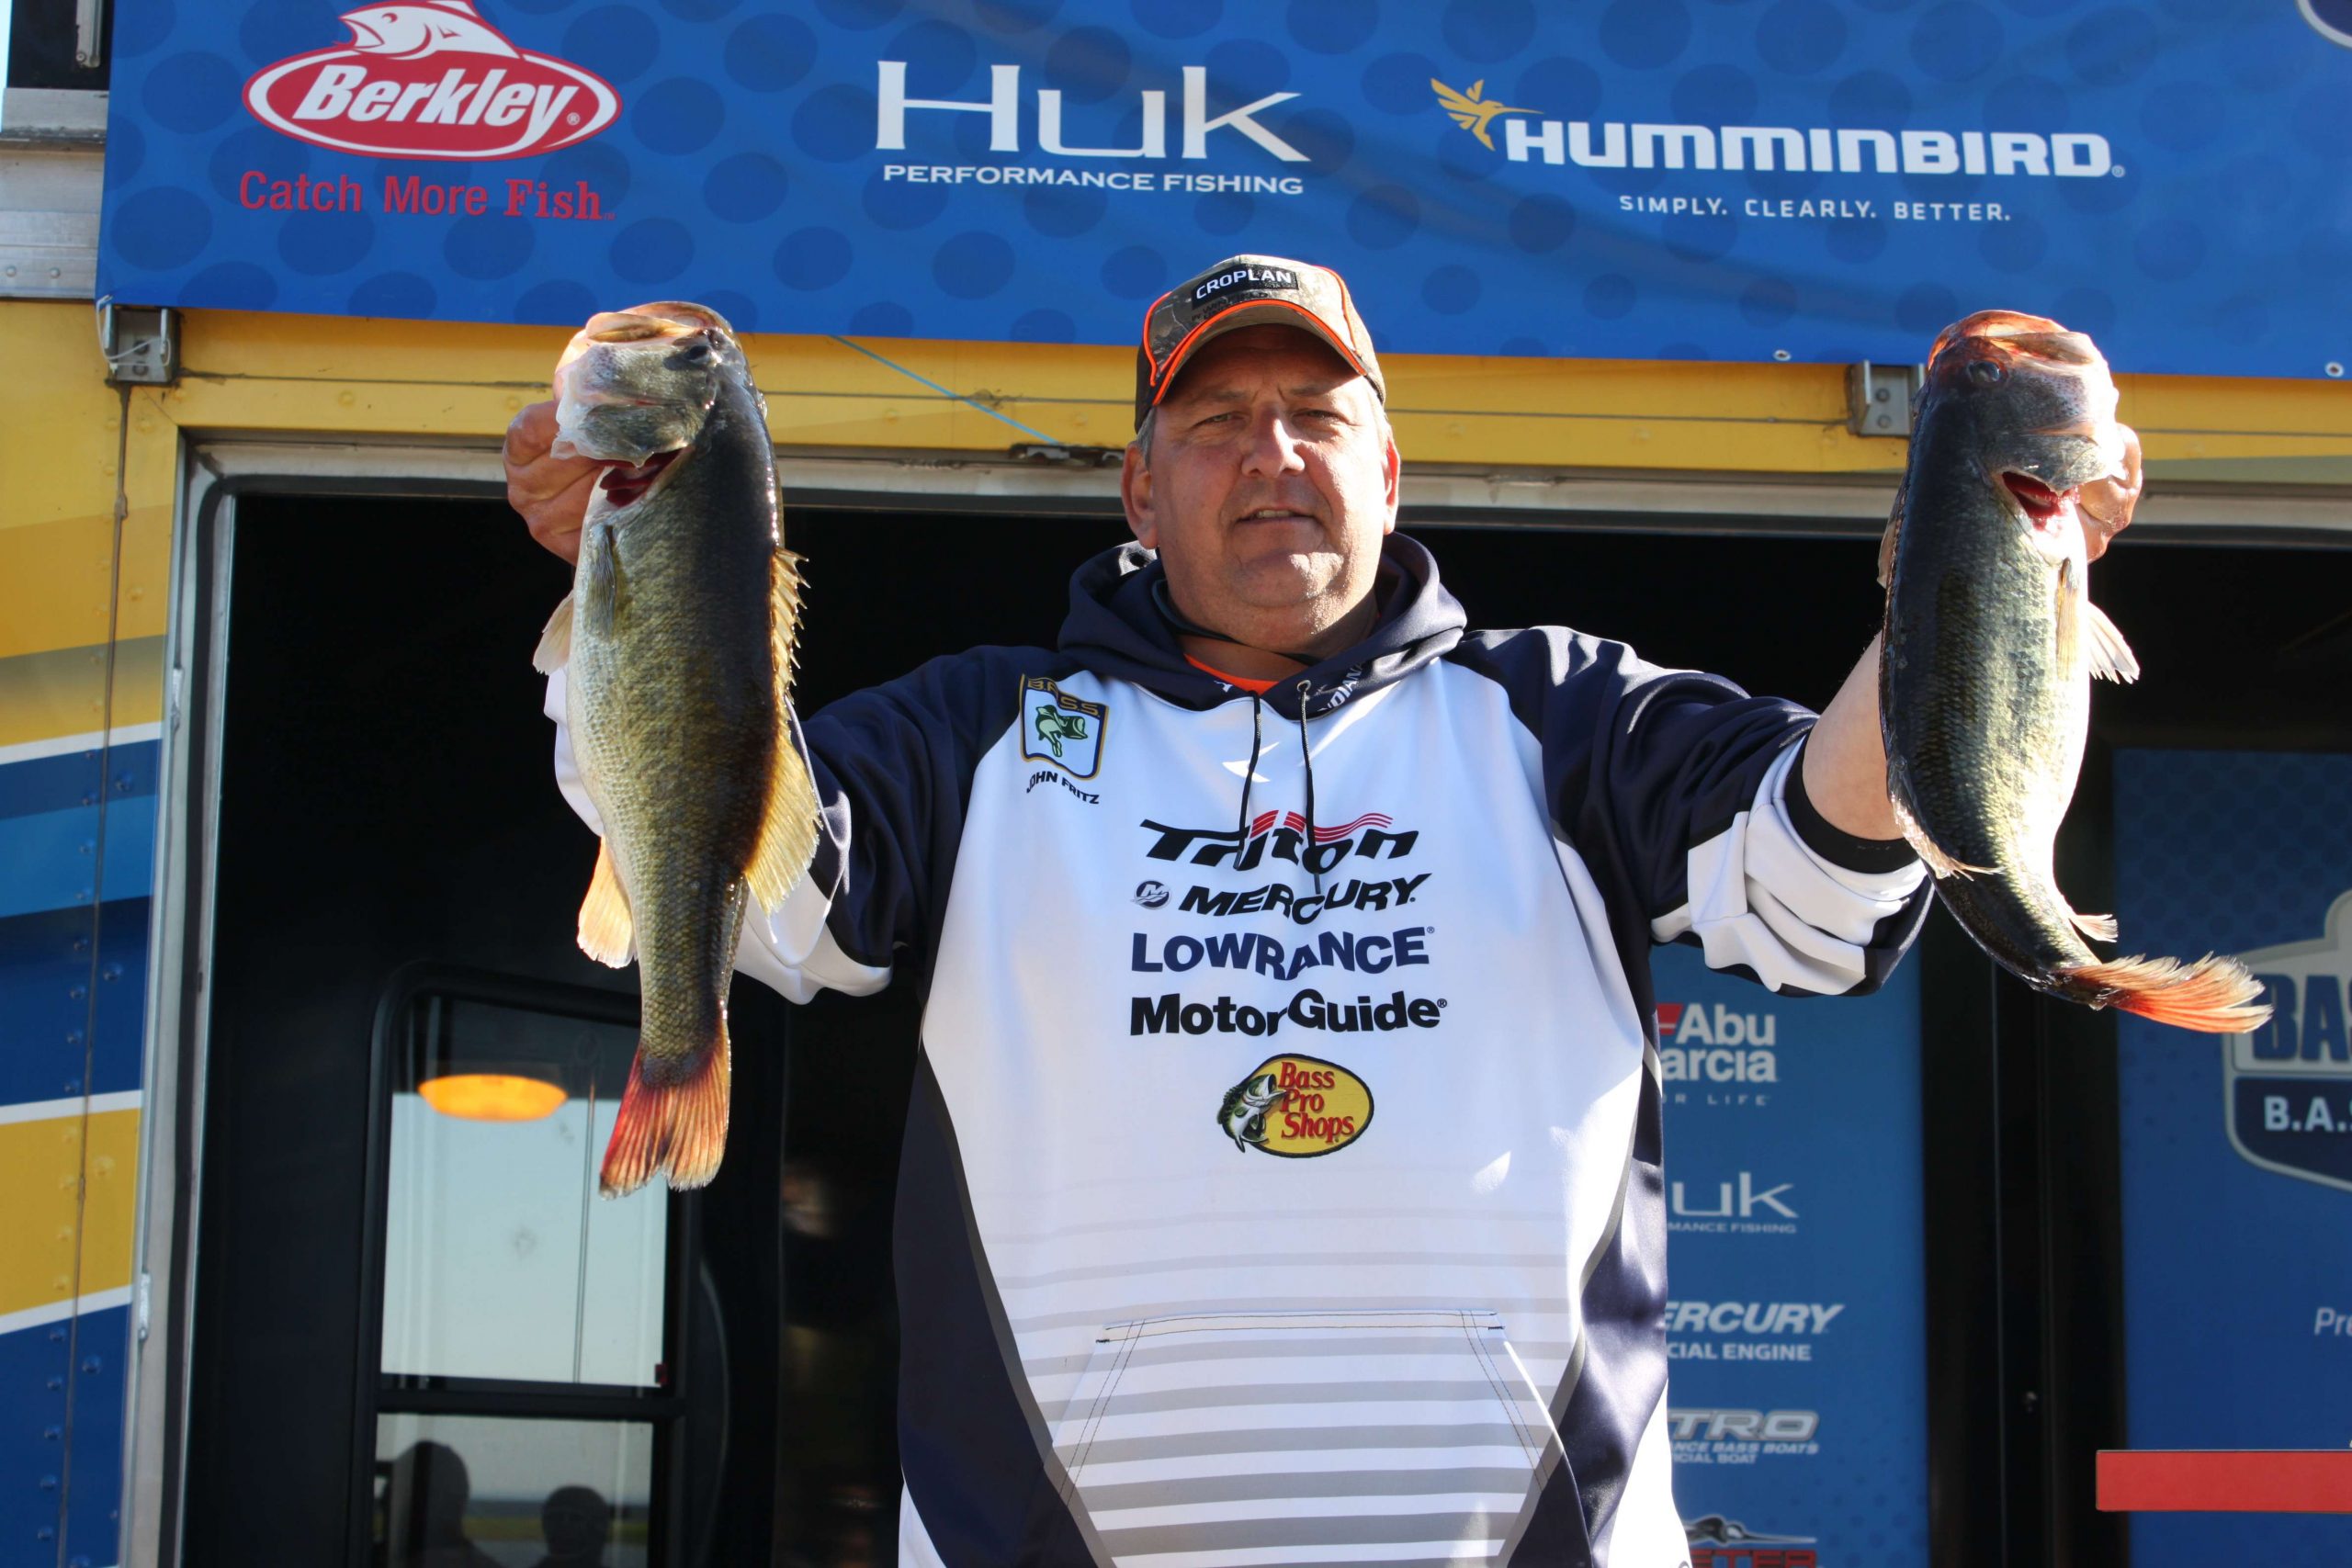 Thereâs John Fritz of Team Indiana. Heâs fifth among non-boaters with three bass weighing 13-8.